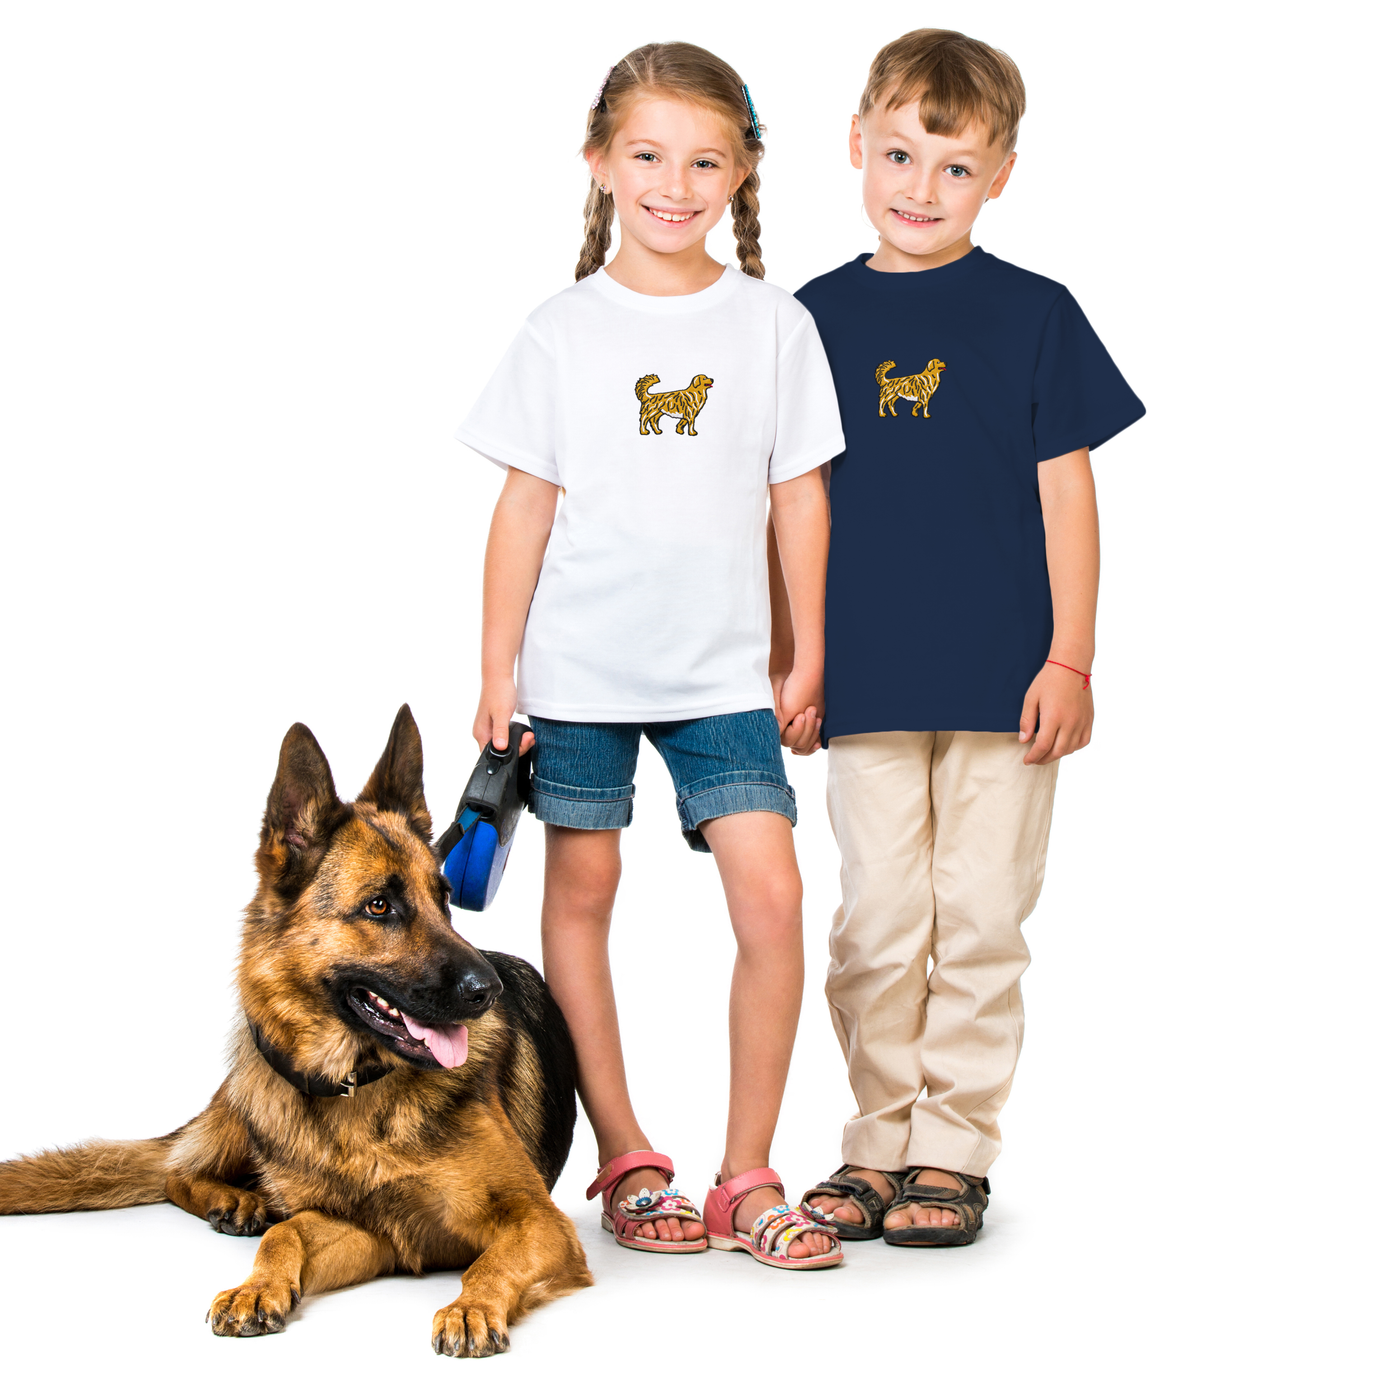 Bobby's Planet Kids Embroidered Golden Retriever T-Shirt from Paws Dog Cat Animals Collection in White Color#color_white